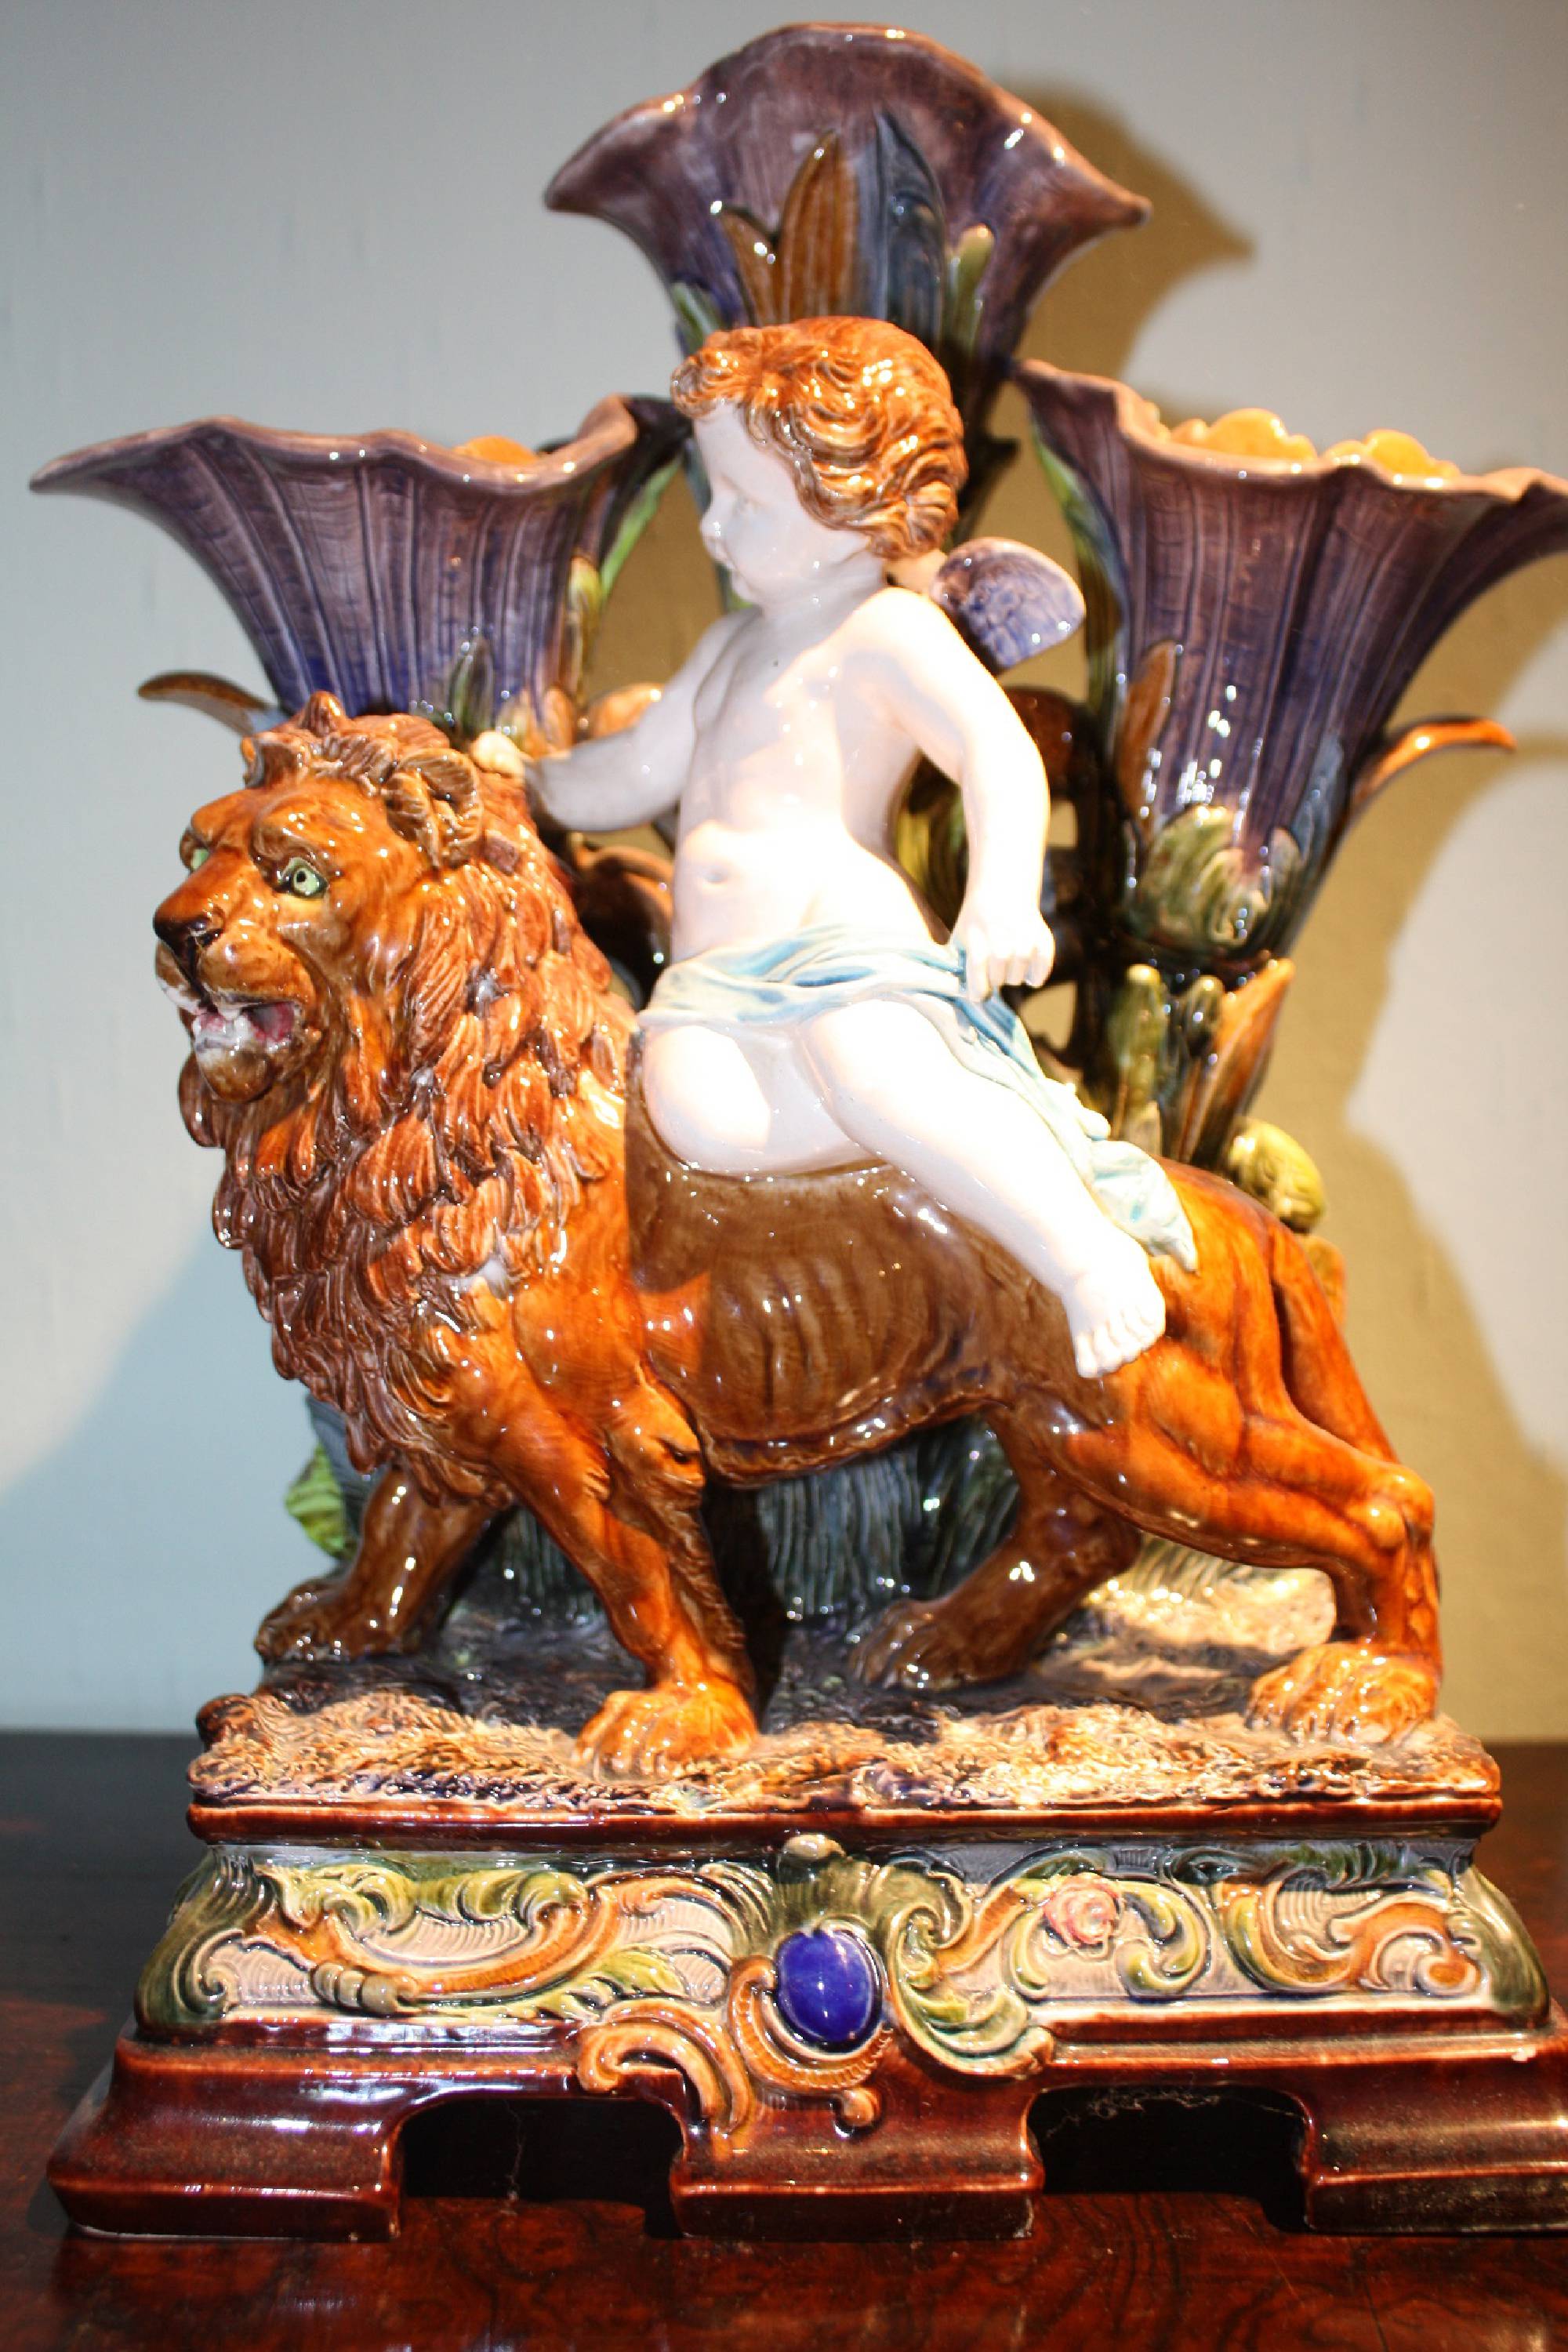 Large splendid 1900 antique majolica, putto riding a lion, behind three calyxes serving as vases